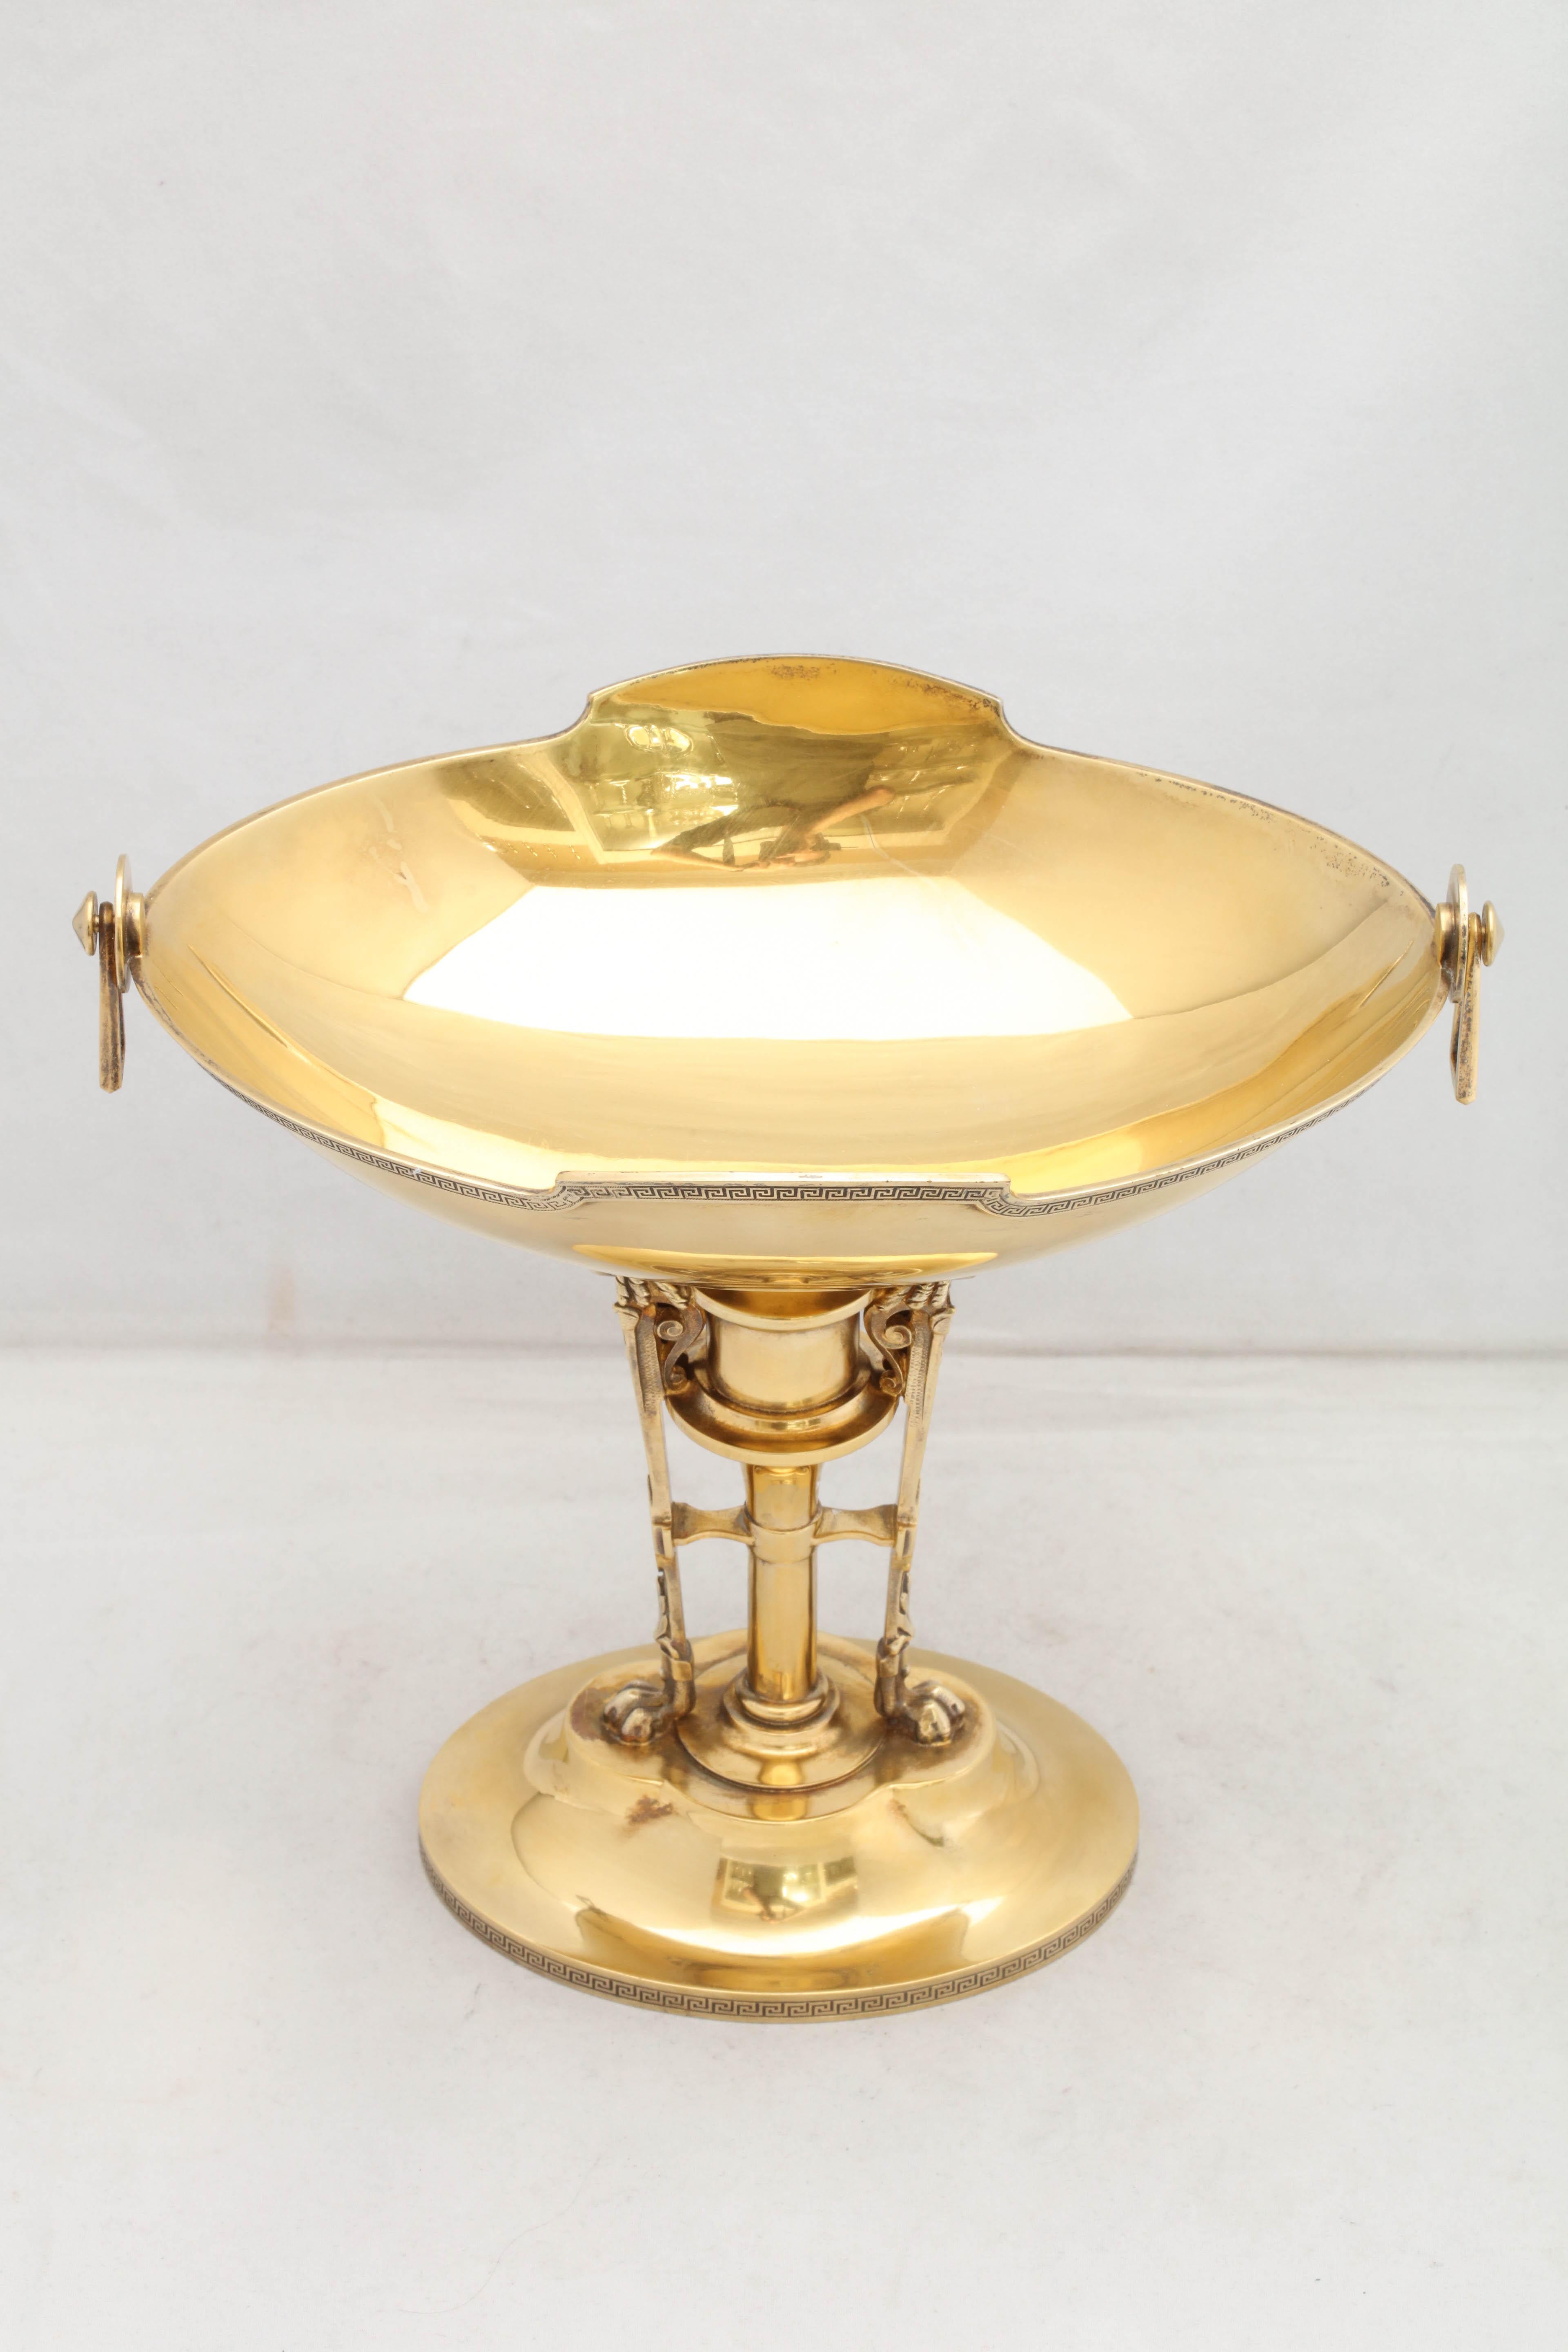 Neoclassical Sterling Silver Gilt Centrepiece by Gorham For Sale 11